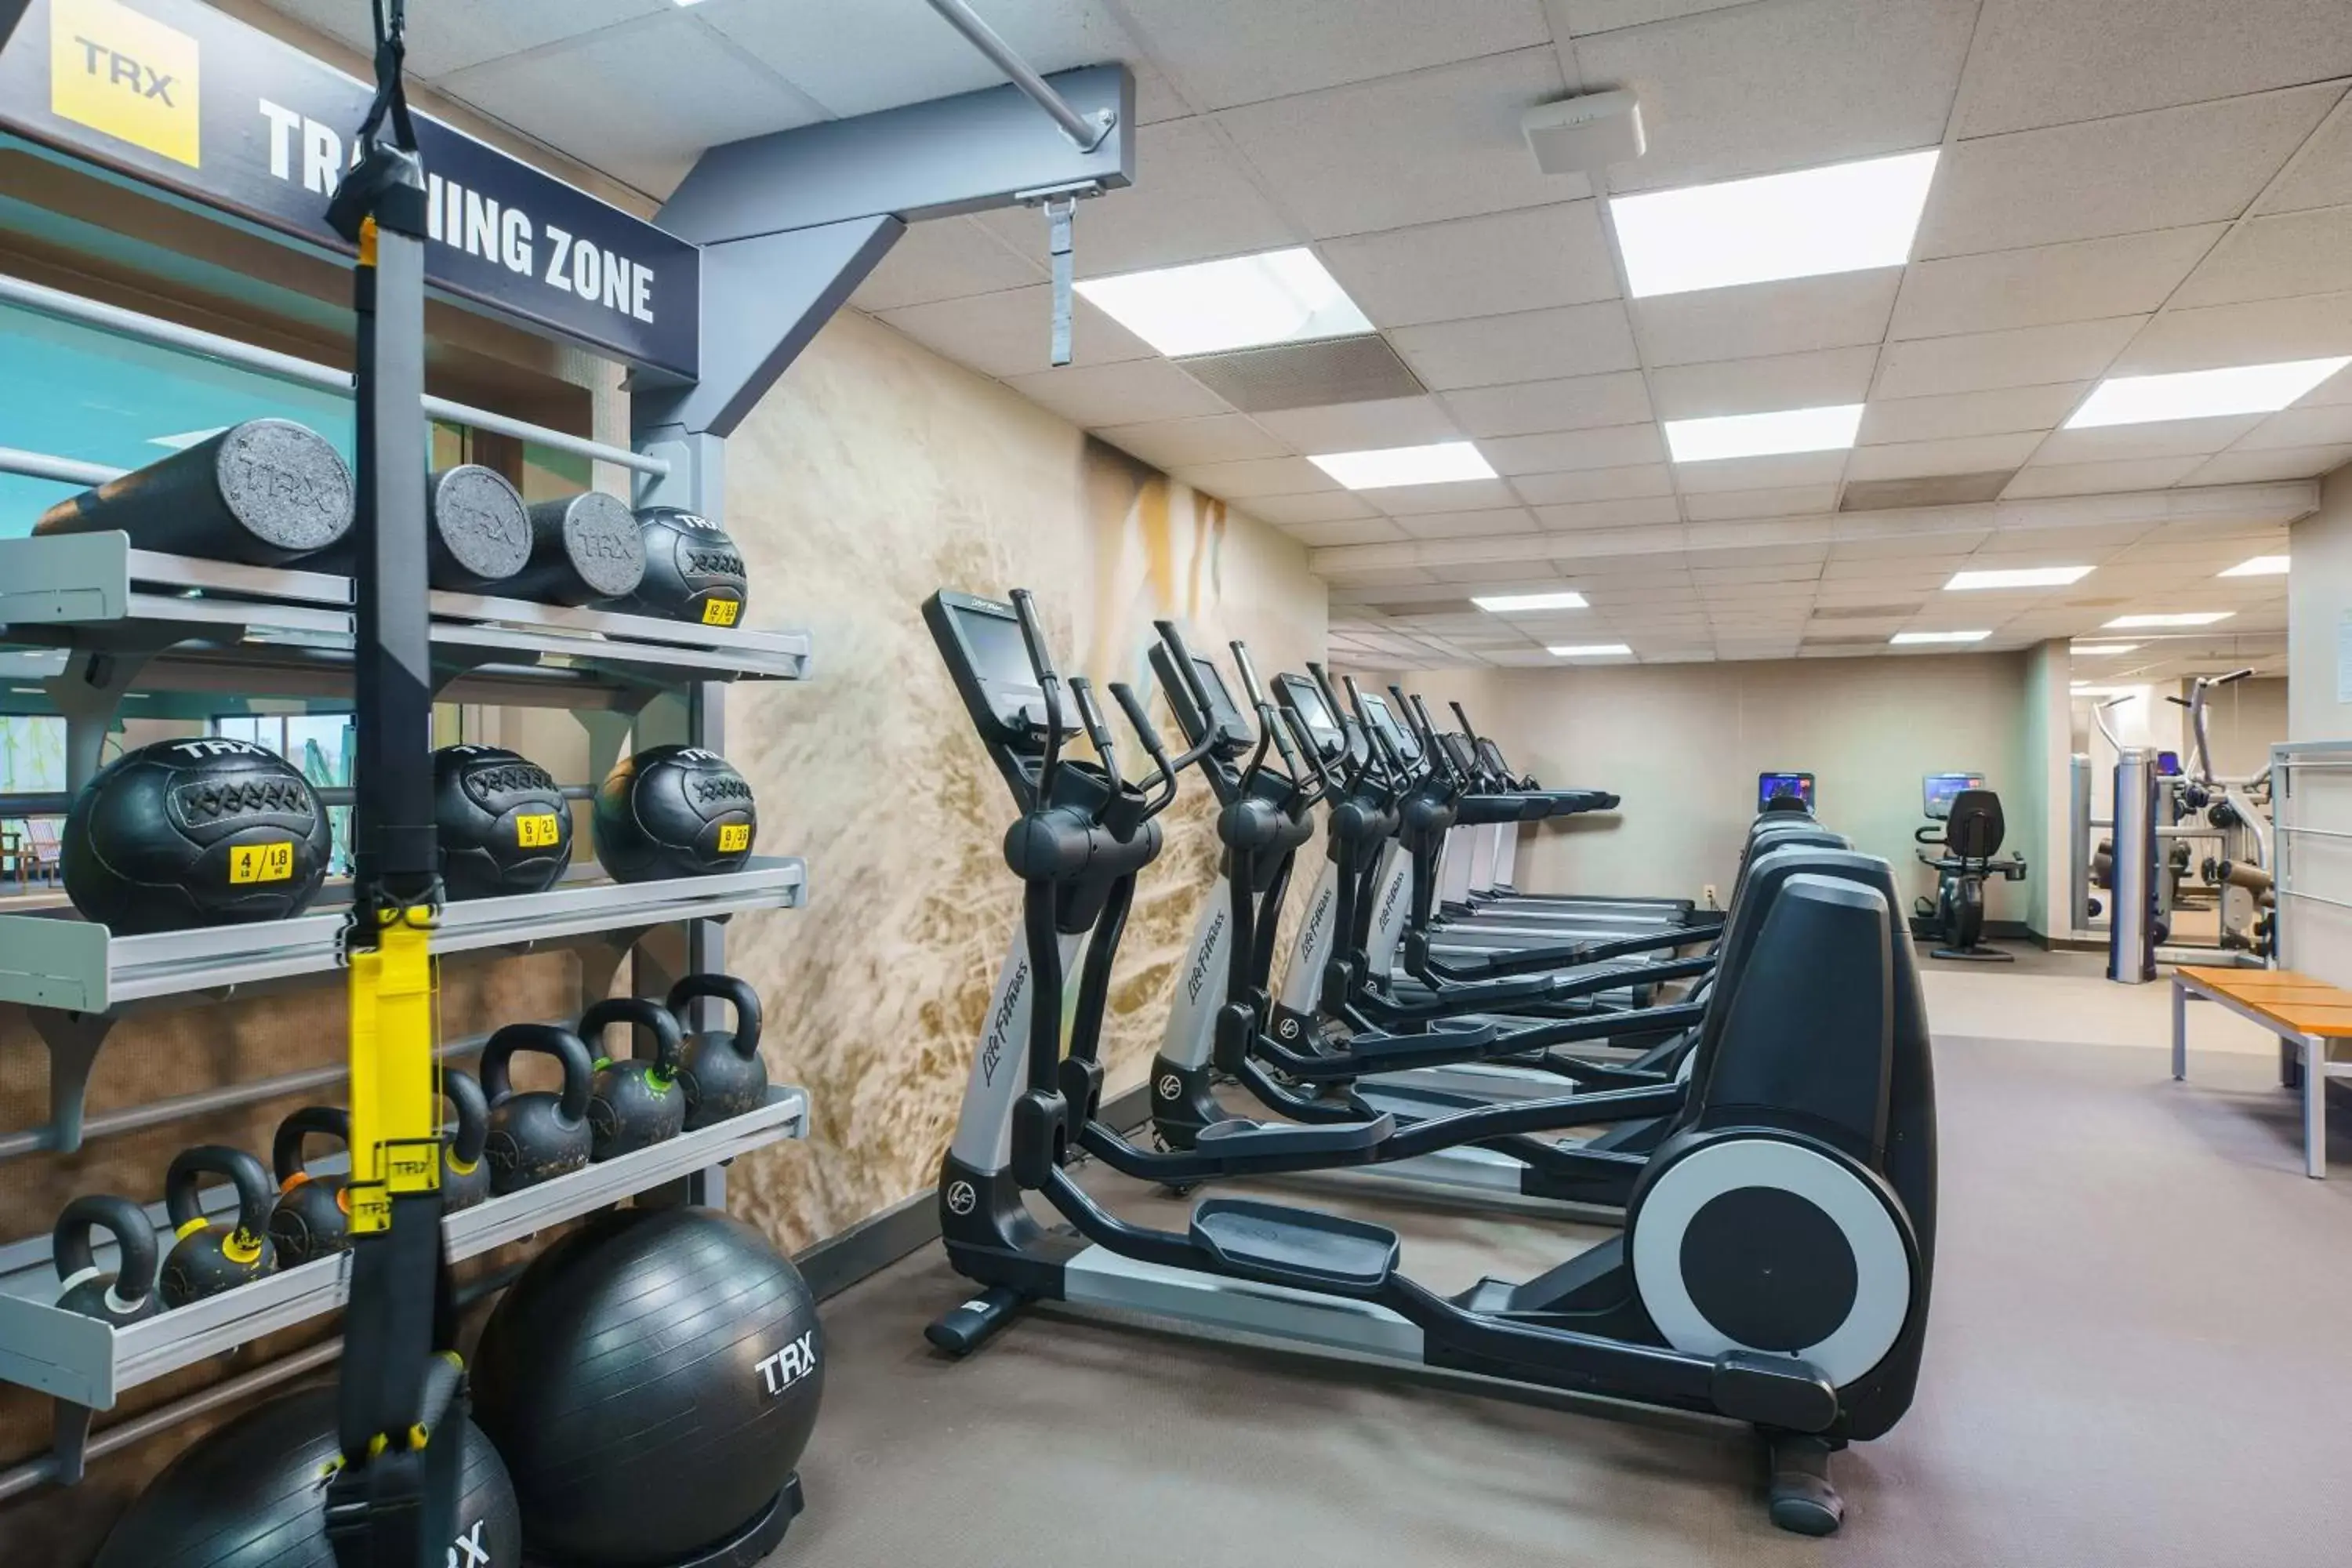 Fitness centre/facilities, Fitness Center/Facilities in The Westin O'Hare